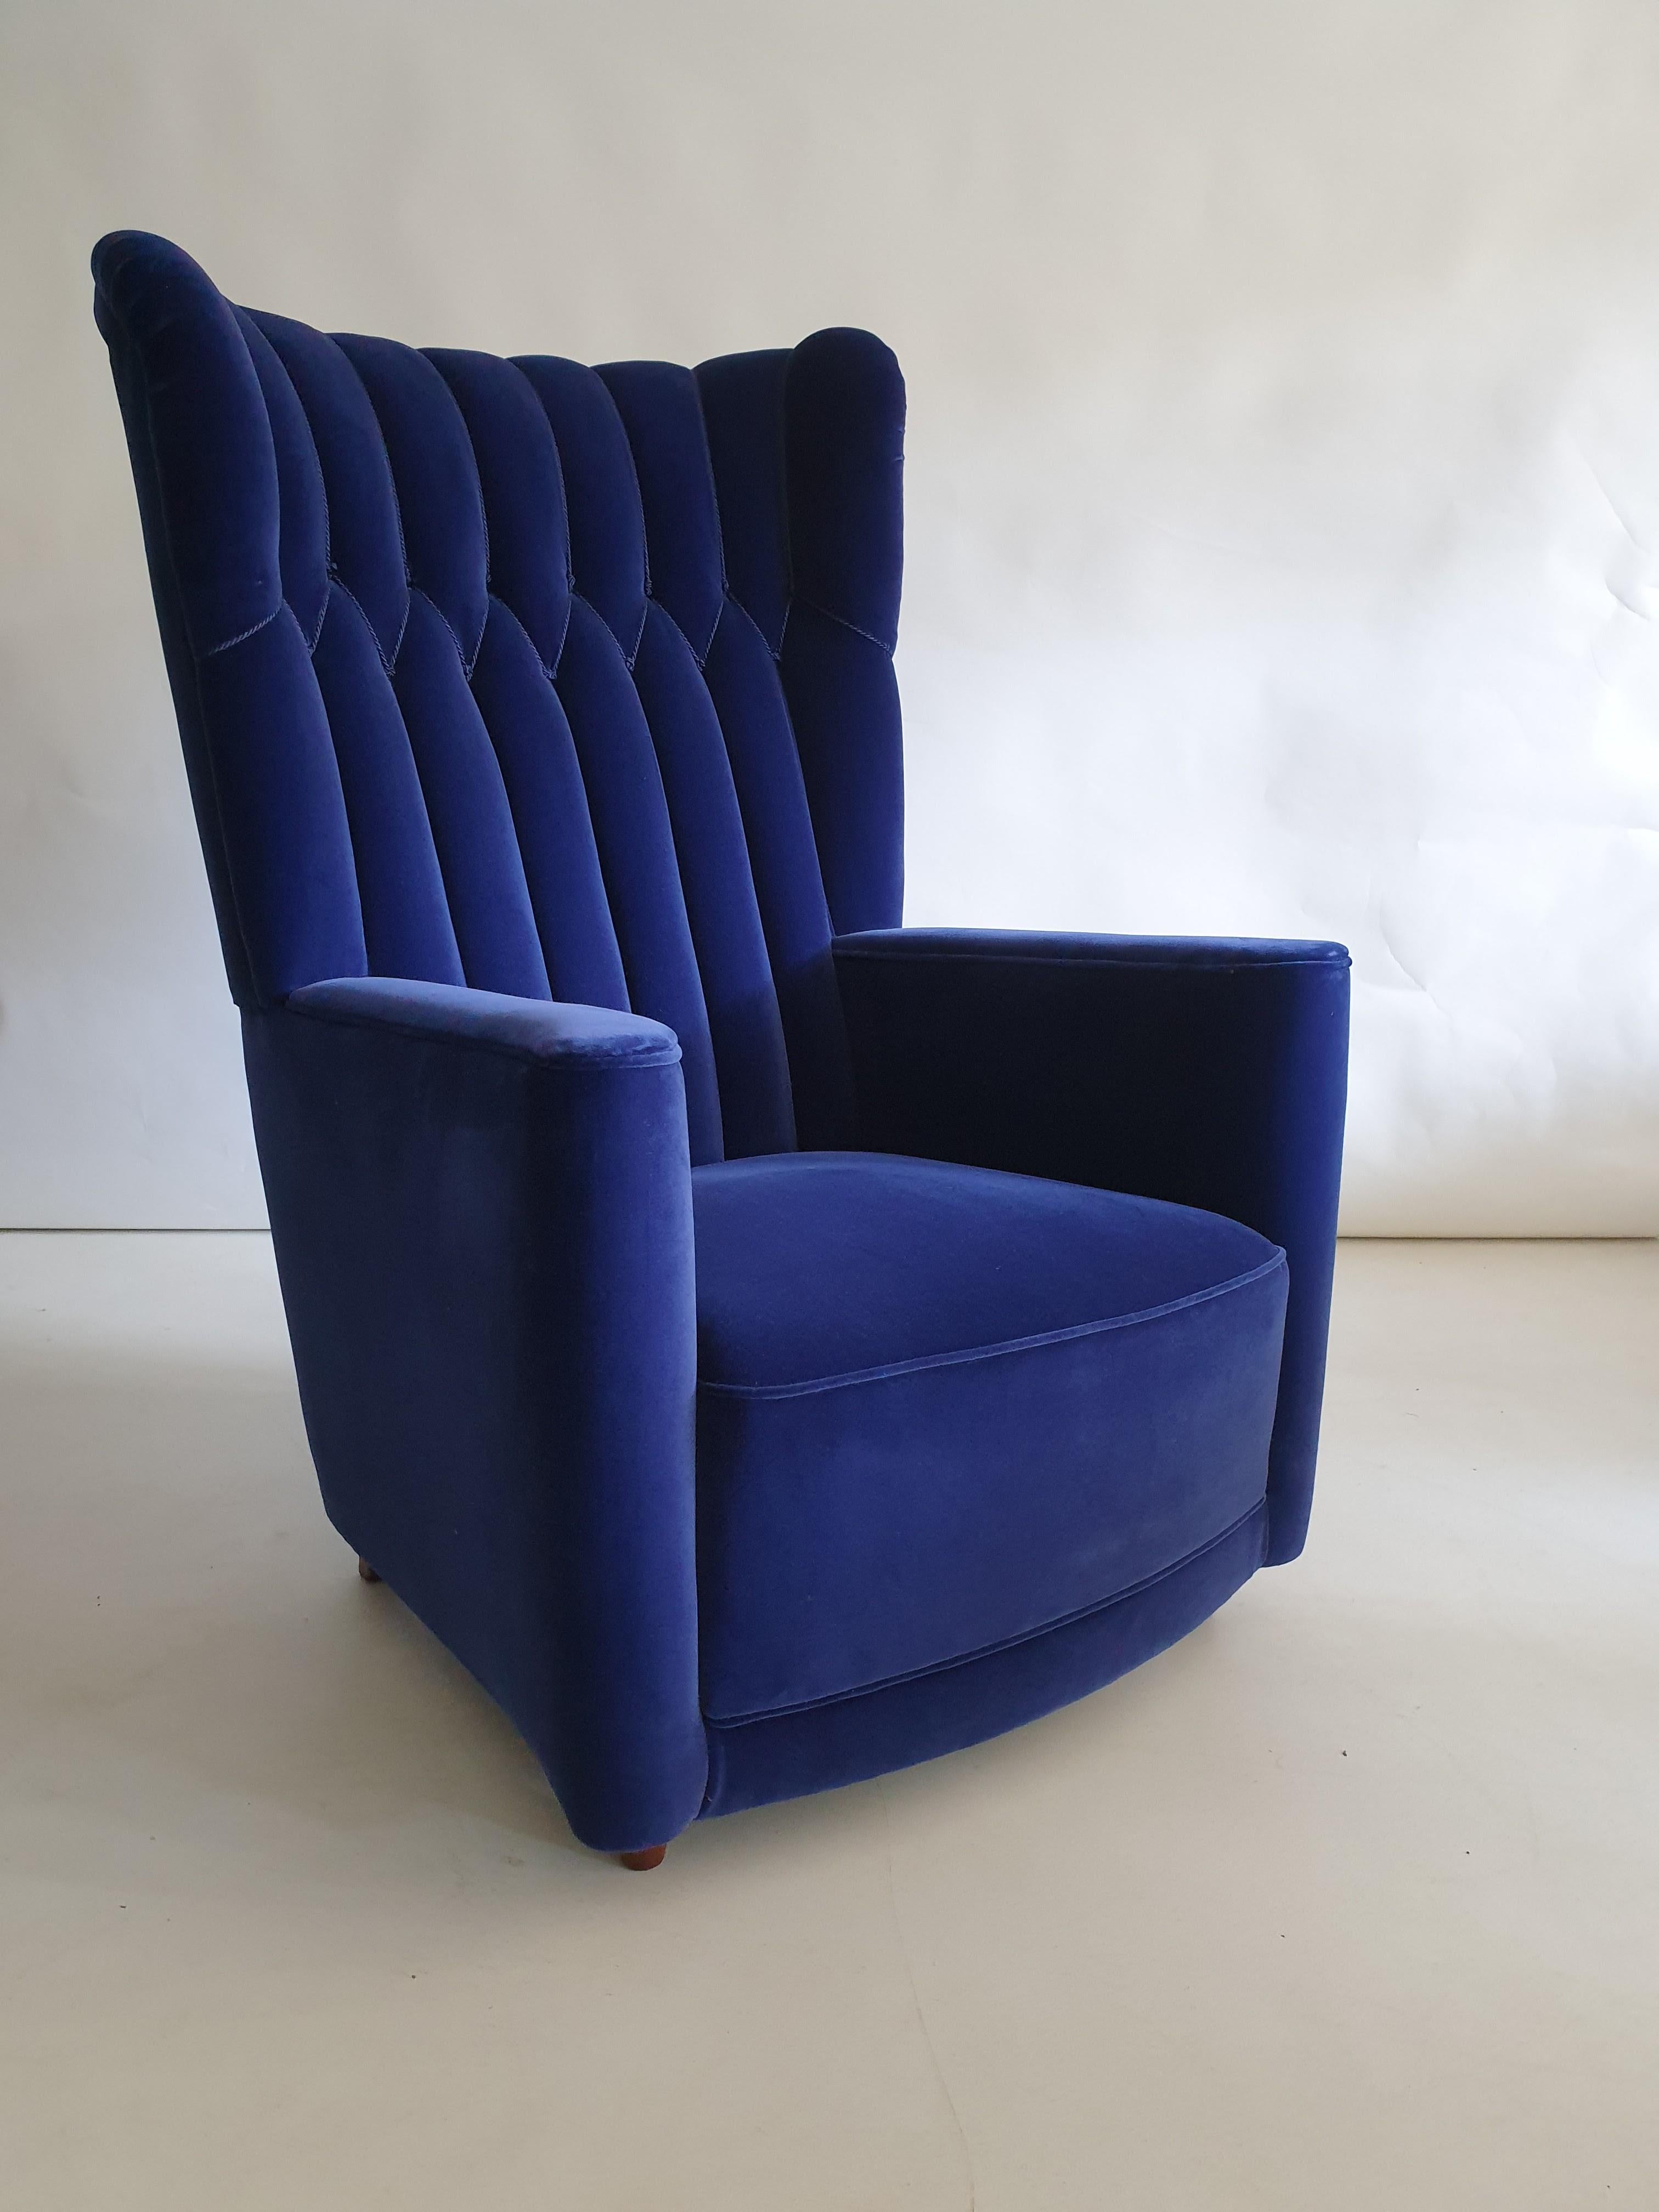 Pair of large comfortable armchairs reupholstered to match the existing vintage upholstery. The chairs have polished wooden legs and are reupholstered in a quality blue cotton velvet.
Literature: L. Sacchetti, Guglielmo Ulrich,
Federico Motta